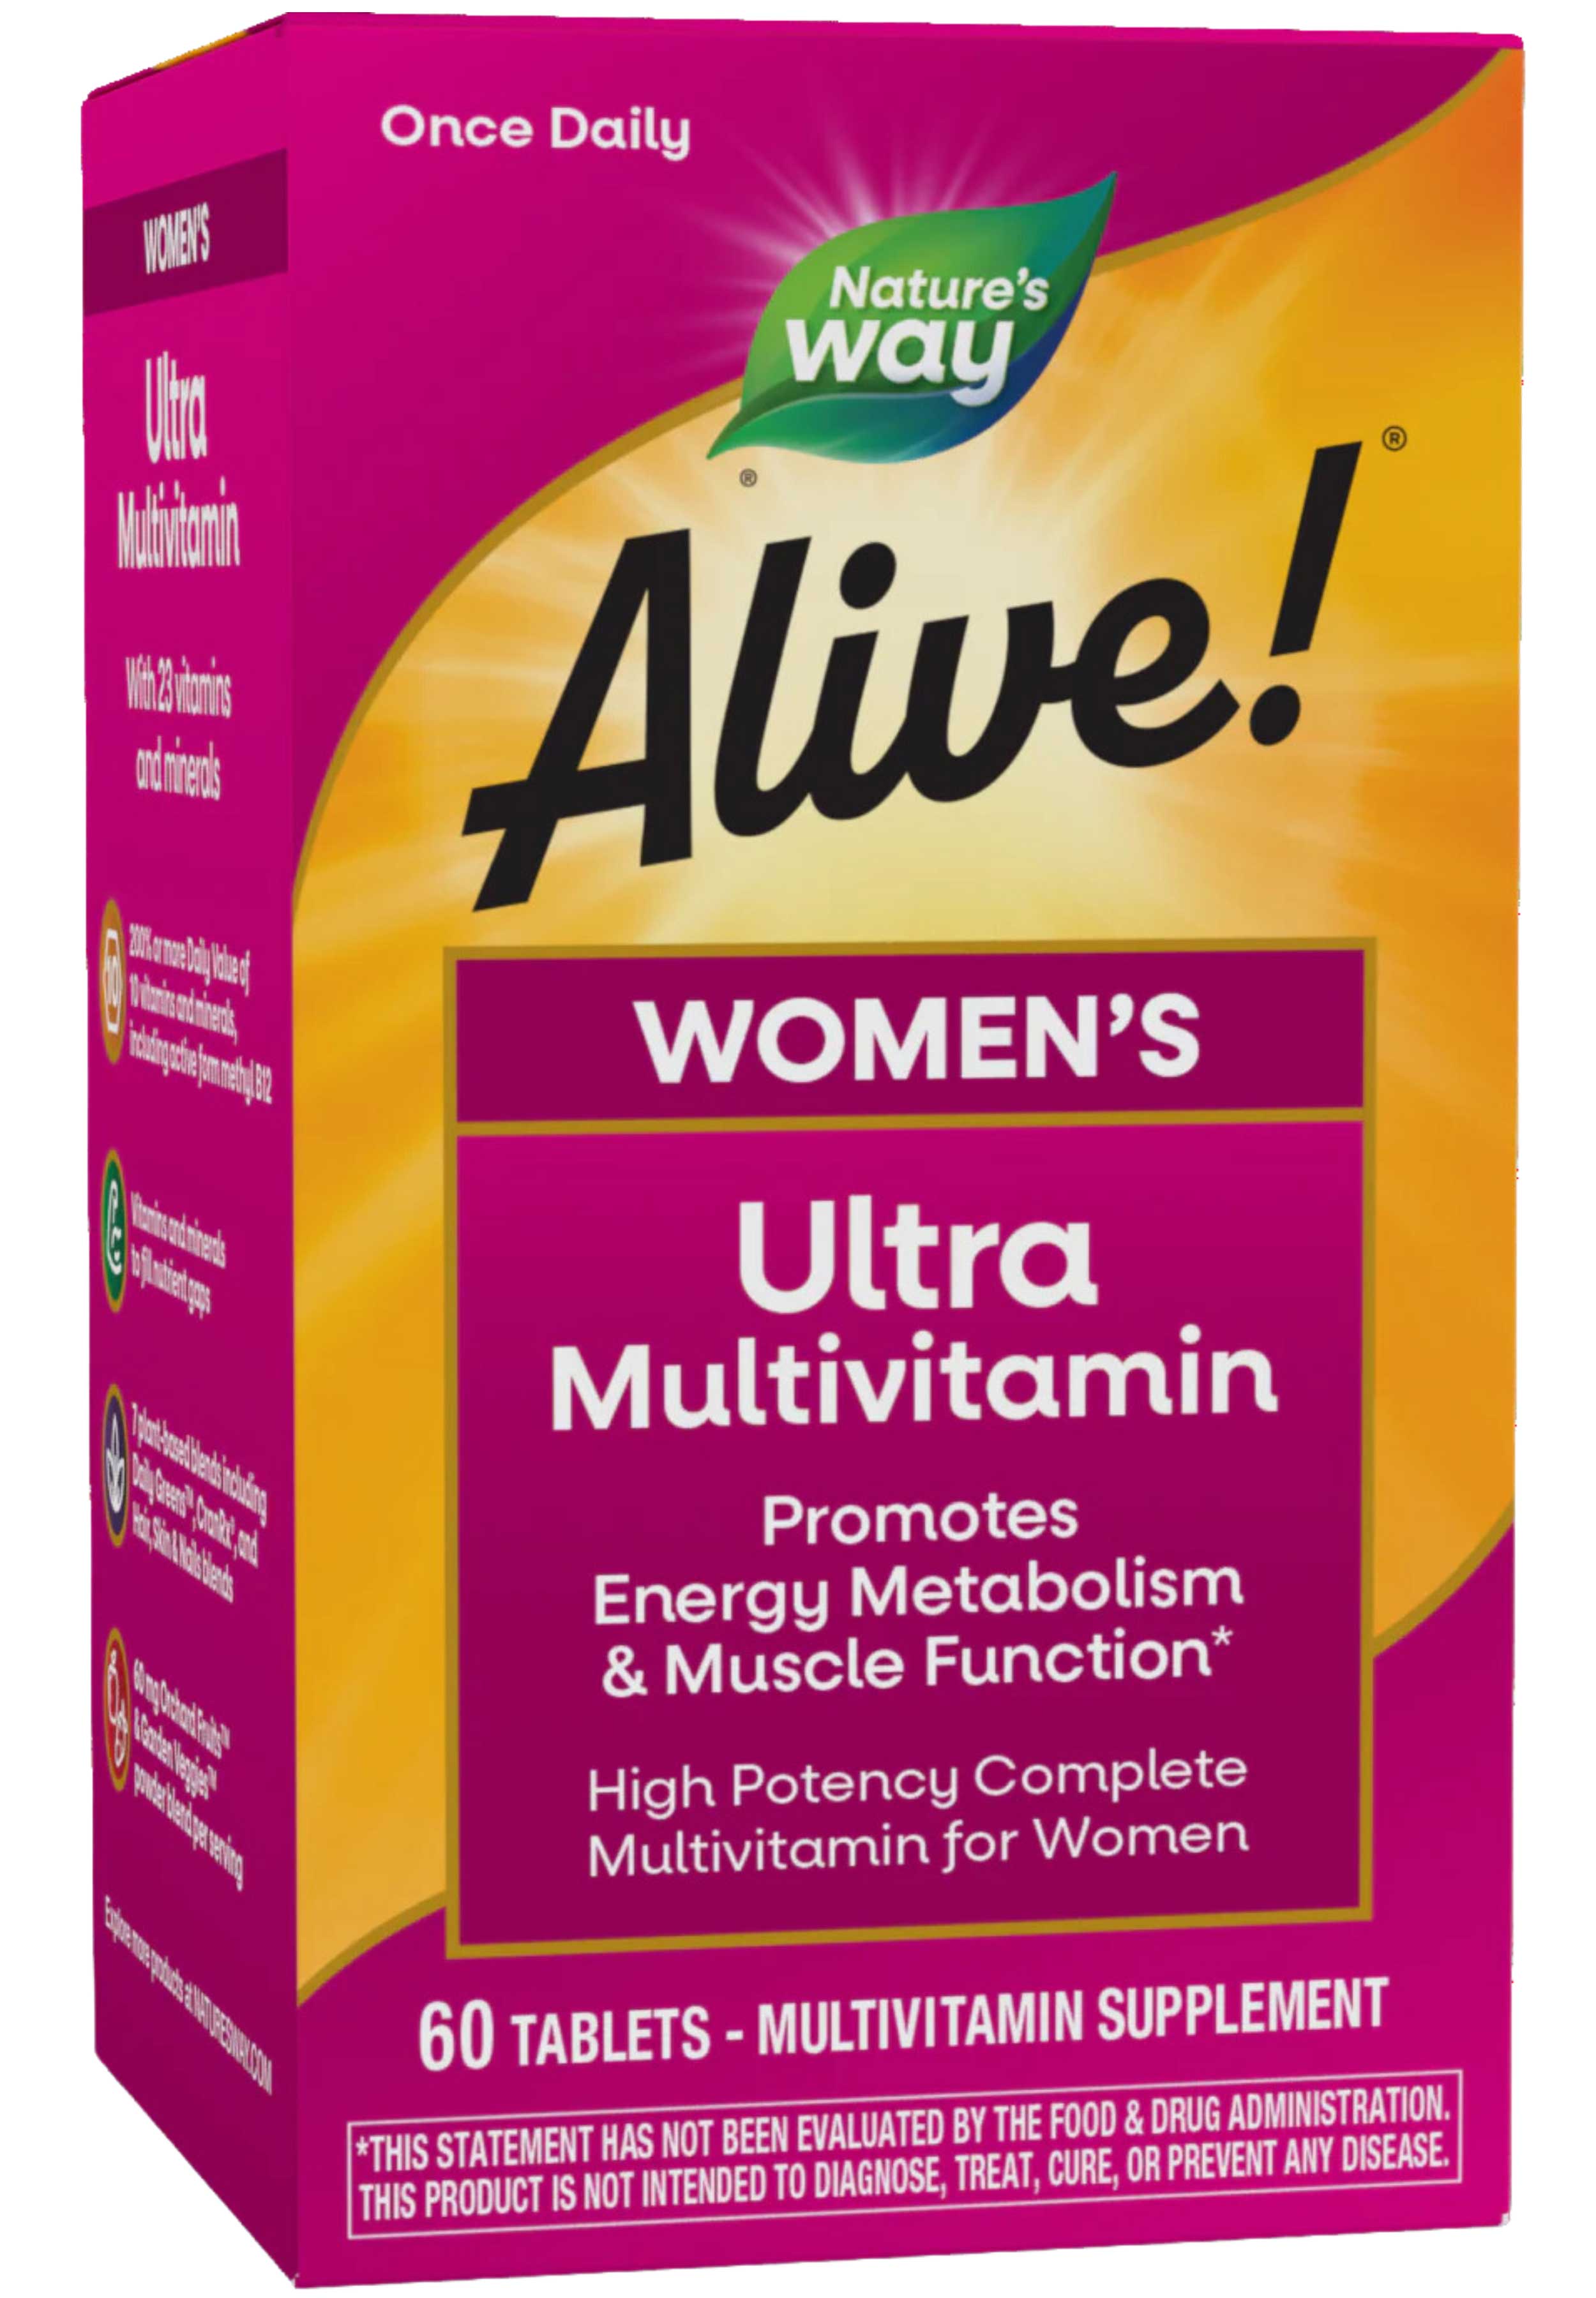 Nature's Way Alive! Once Daily Women's Ultra Potency